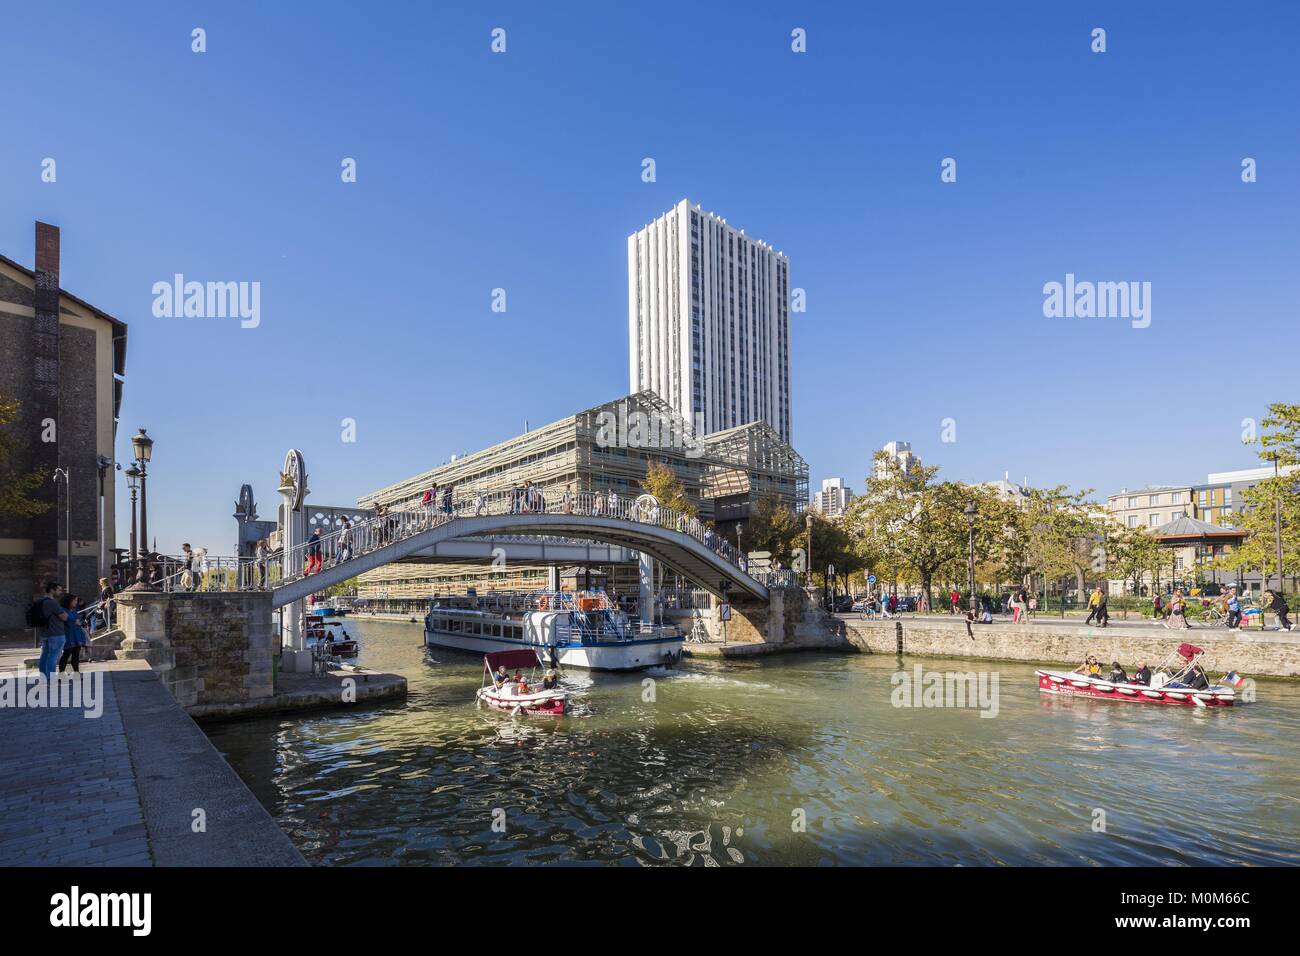 France,Paris,Bassin de la Villette,the largest artificial body of water in Paris,that links the Canal de l'Ourcq to the Canal Saint-Martin,cruise on the canals,bridge raising of the street of Crimea Stock Photo